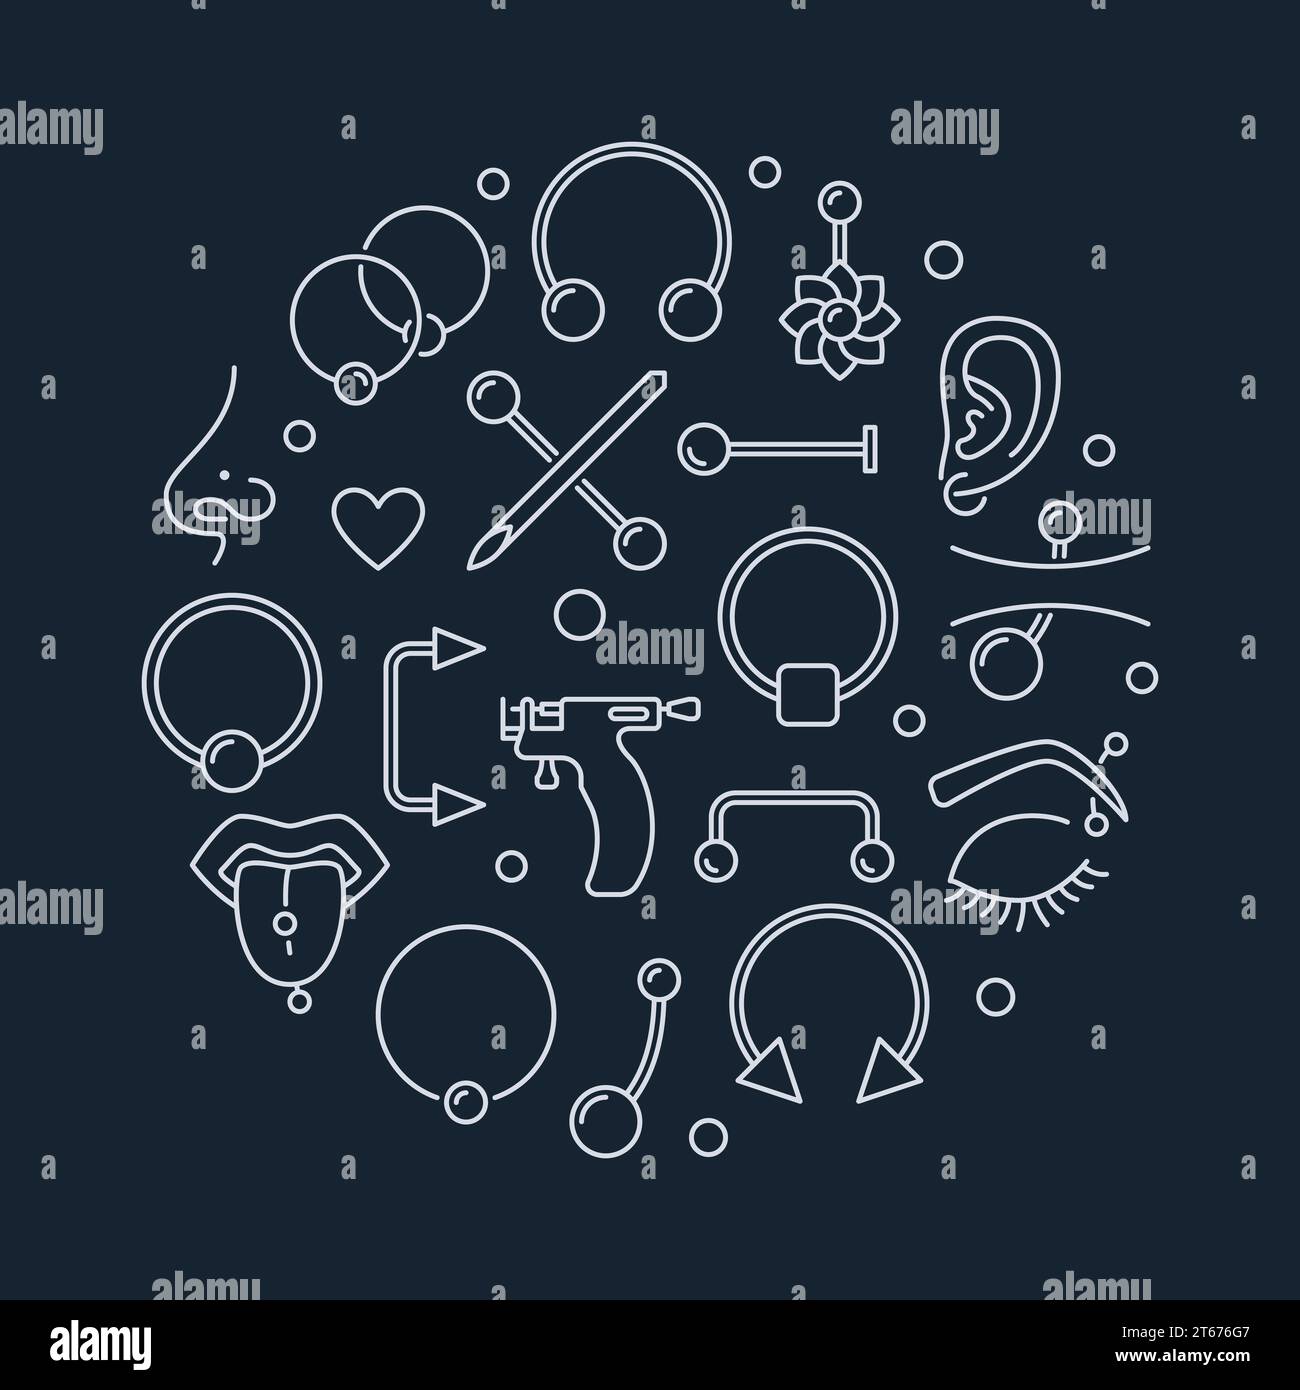 Piercing vector circular illustration made with linear piercings concept icons on dark background Stock Vector